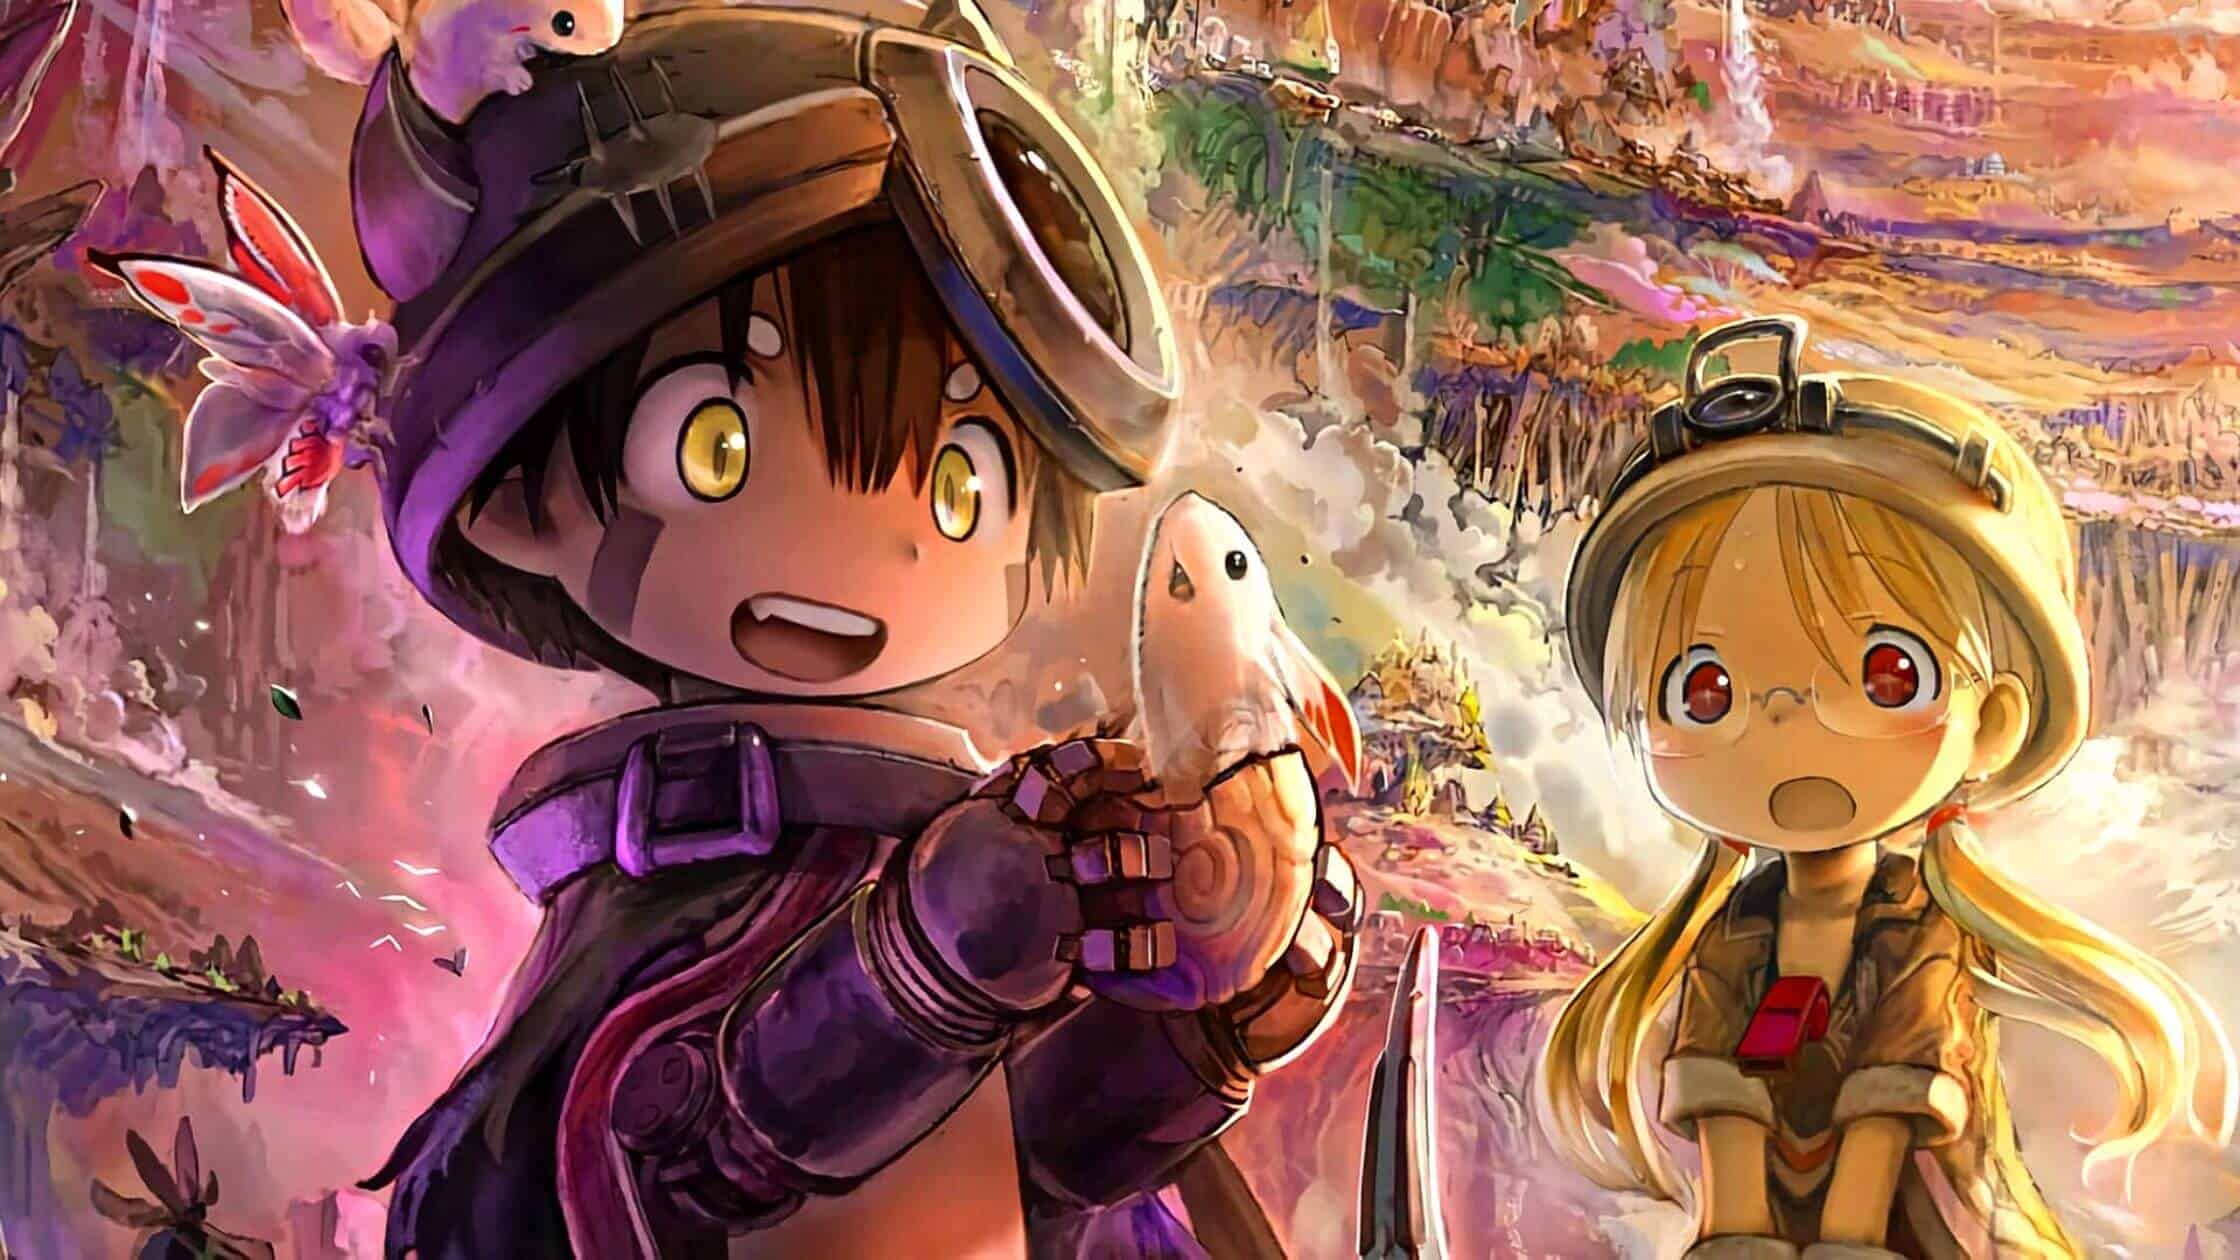 Made In Abyss Season 2 Release Date, Trailer, Cast, And Plot